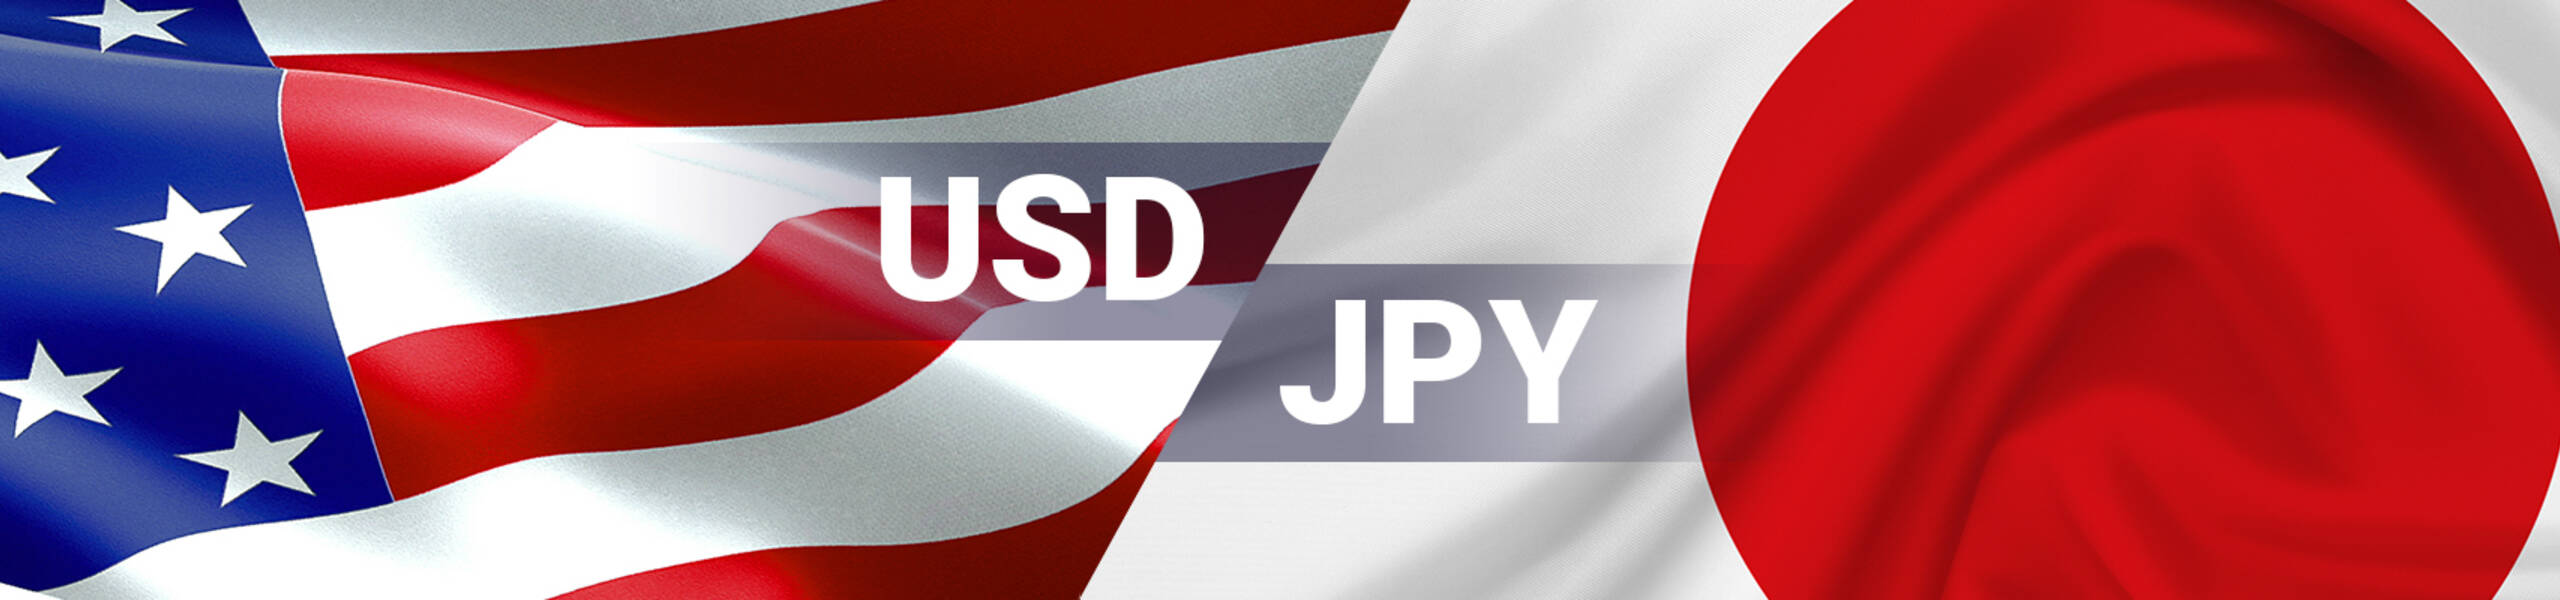 USD/JPY Dailyレポート 2017/08/24